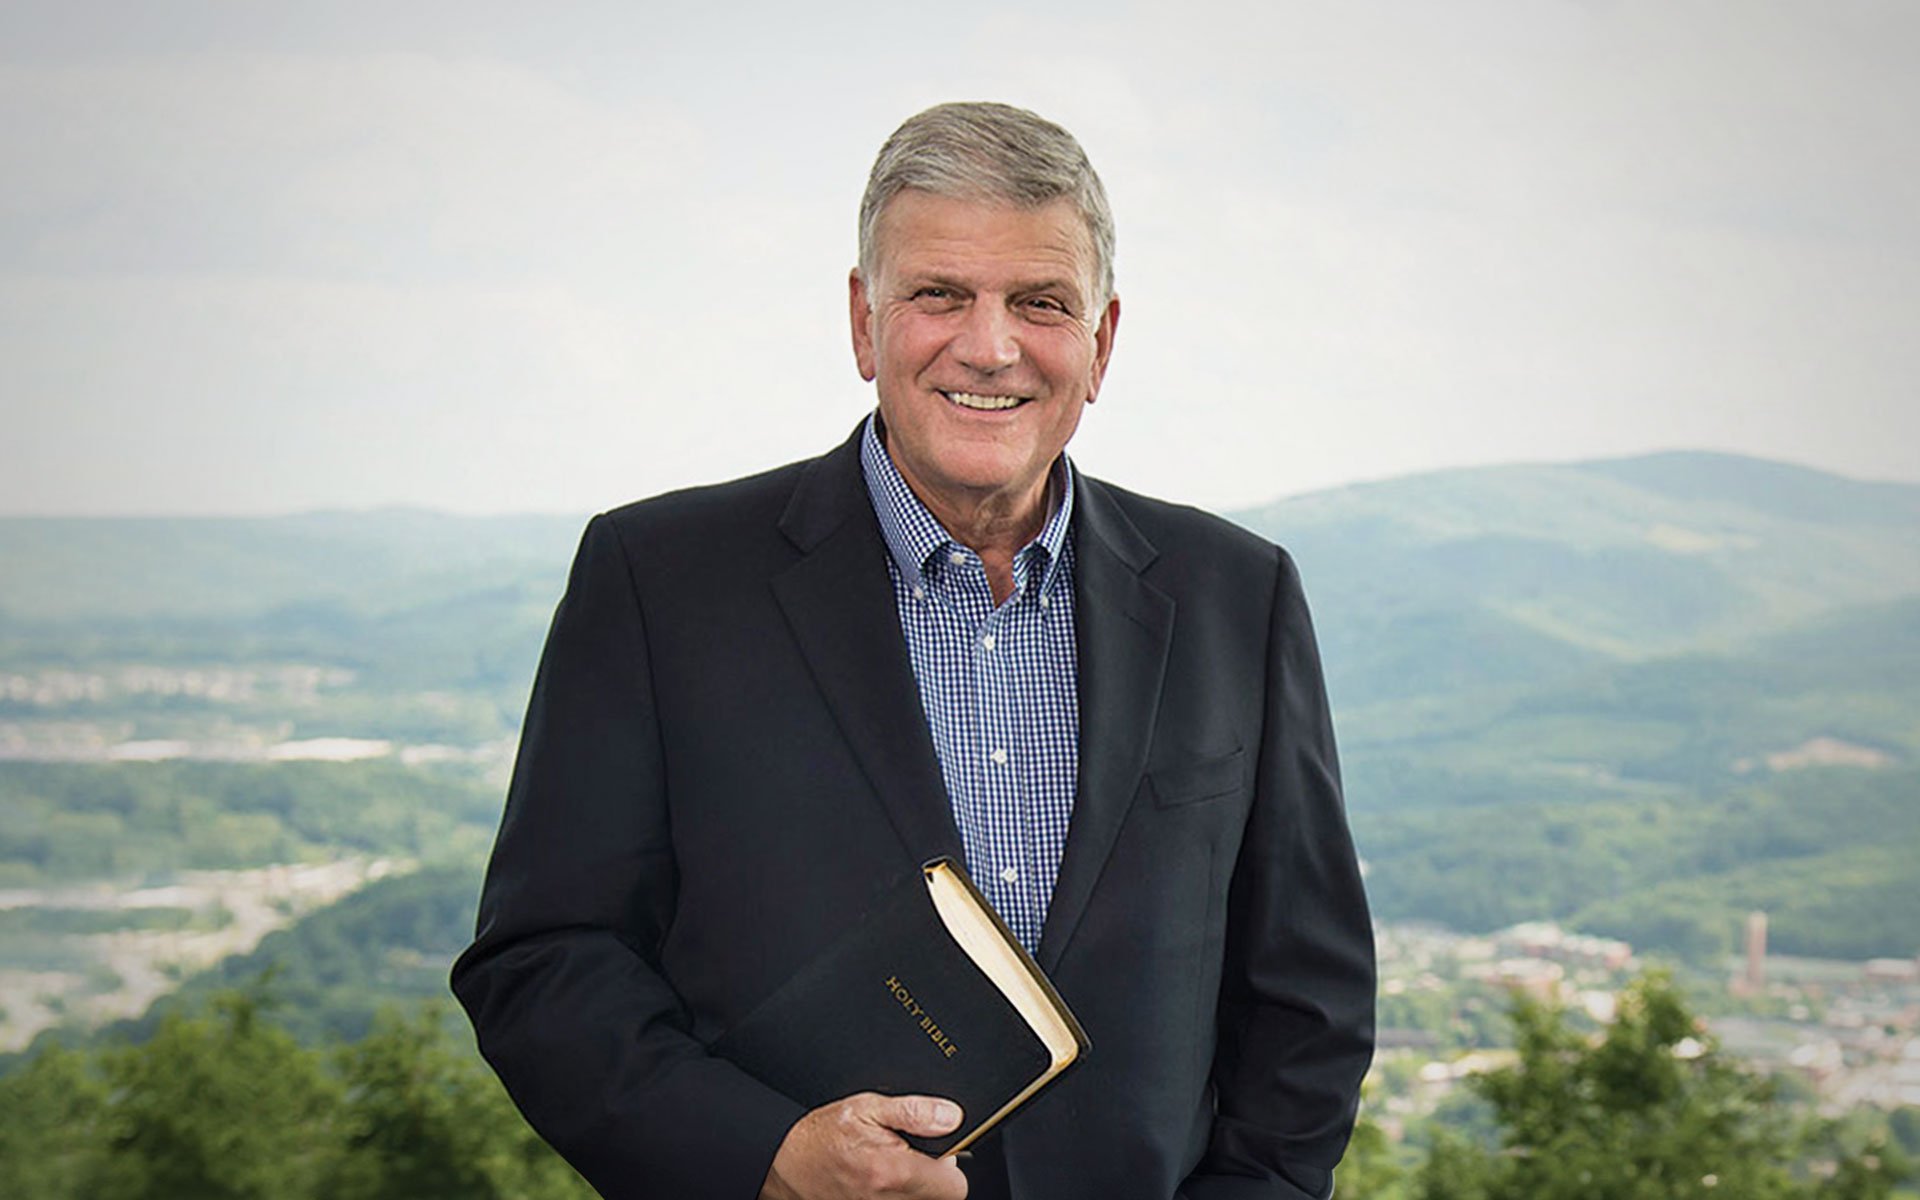 Your Past Erased: A Salvation Message from Rev. Franklin Graham